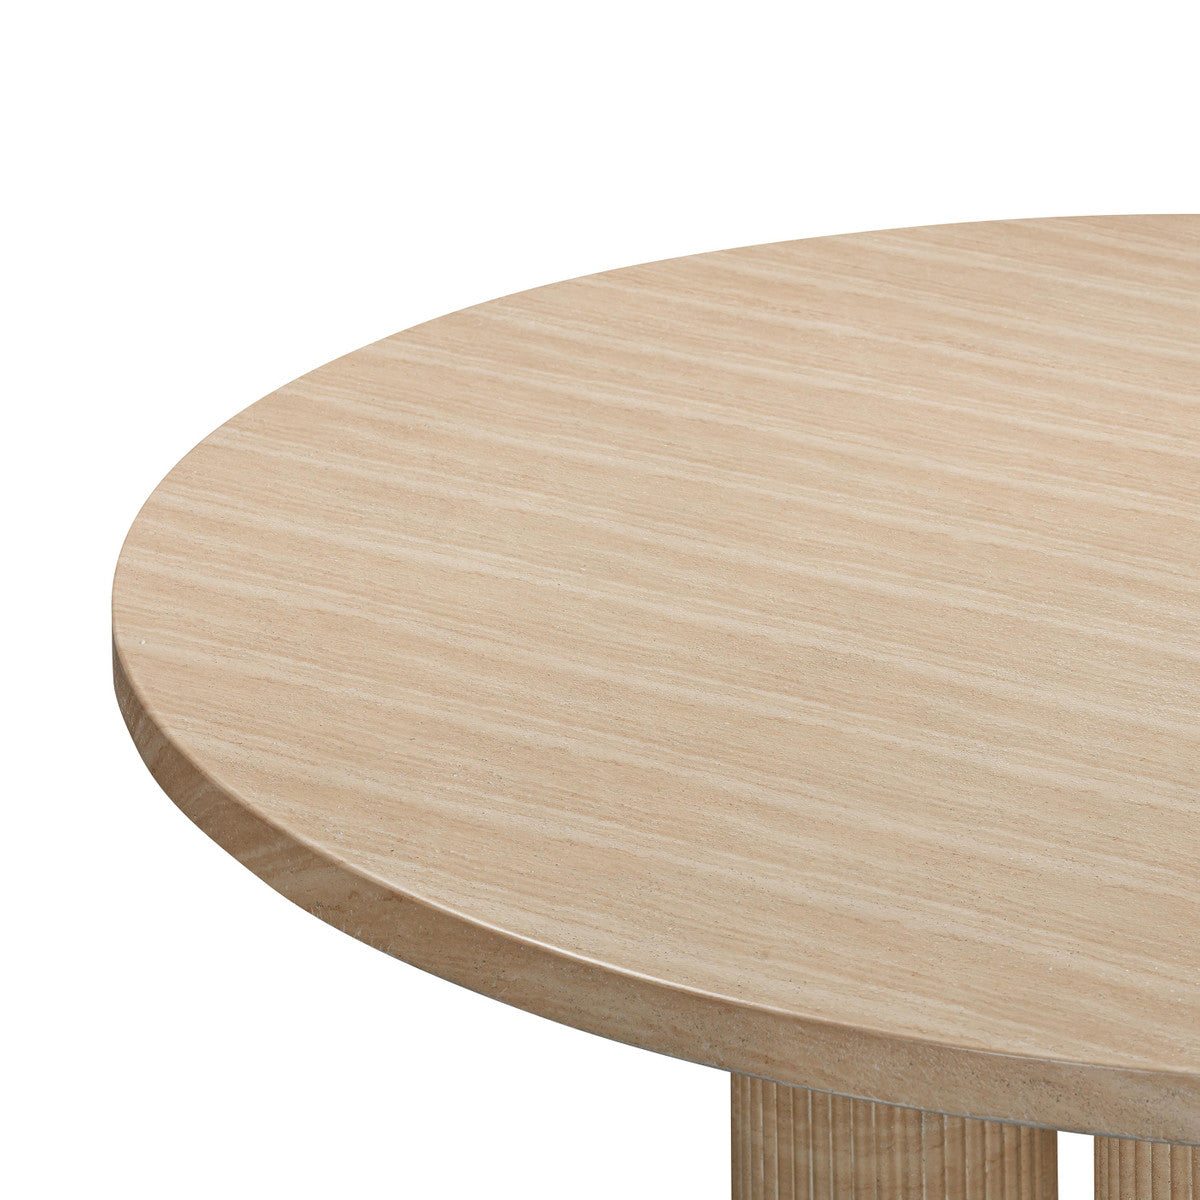 Patti Textured Faux Travertine Indoor / Outdoor Round Dining Table